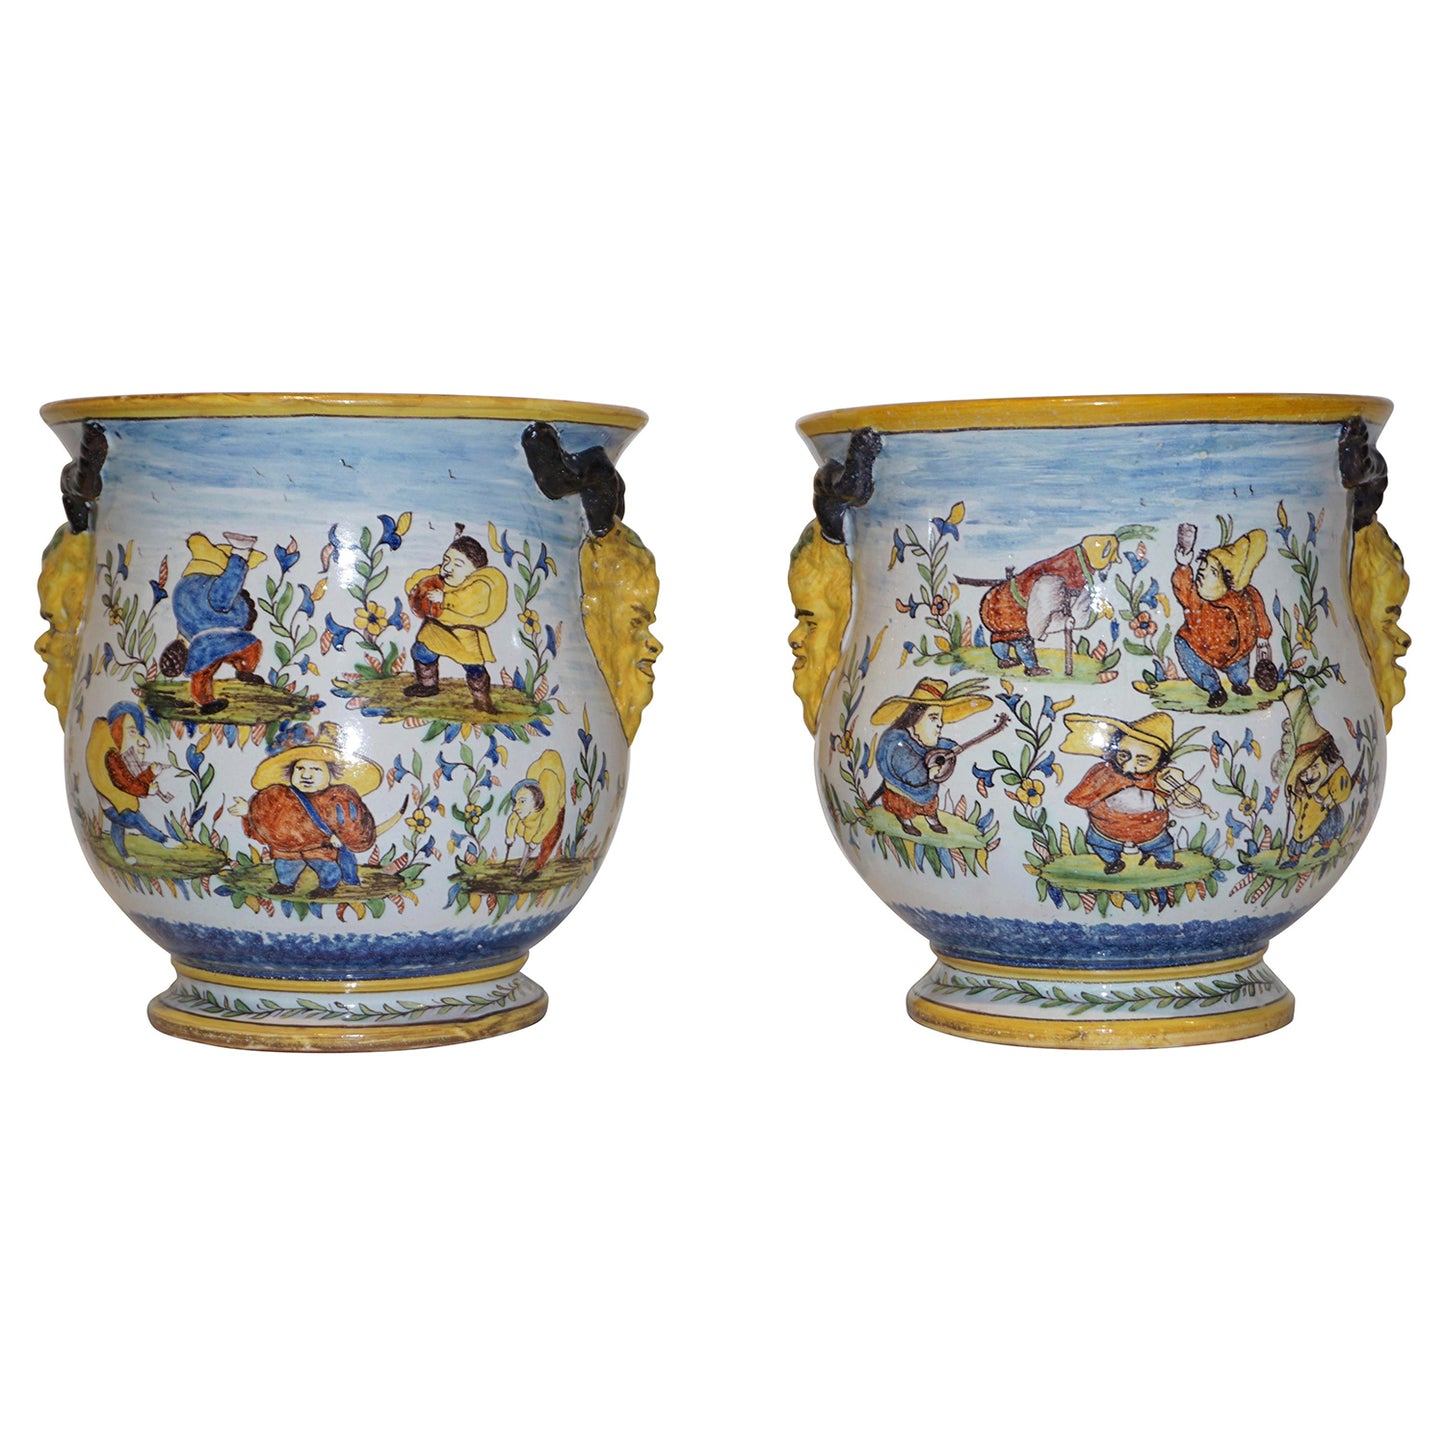 1870s French Pair of Yellow Blue Green Red White Majolica Jardinières / Planters